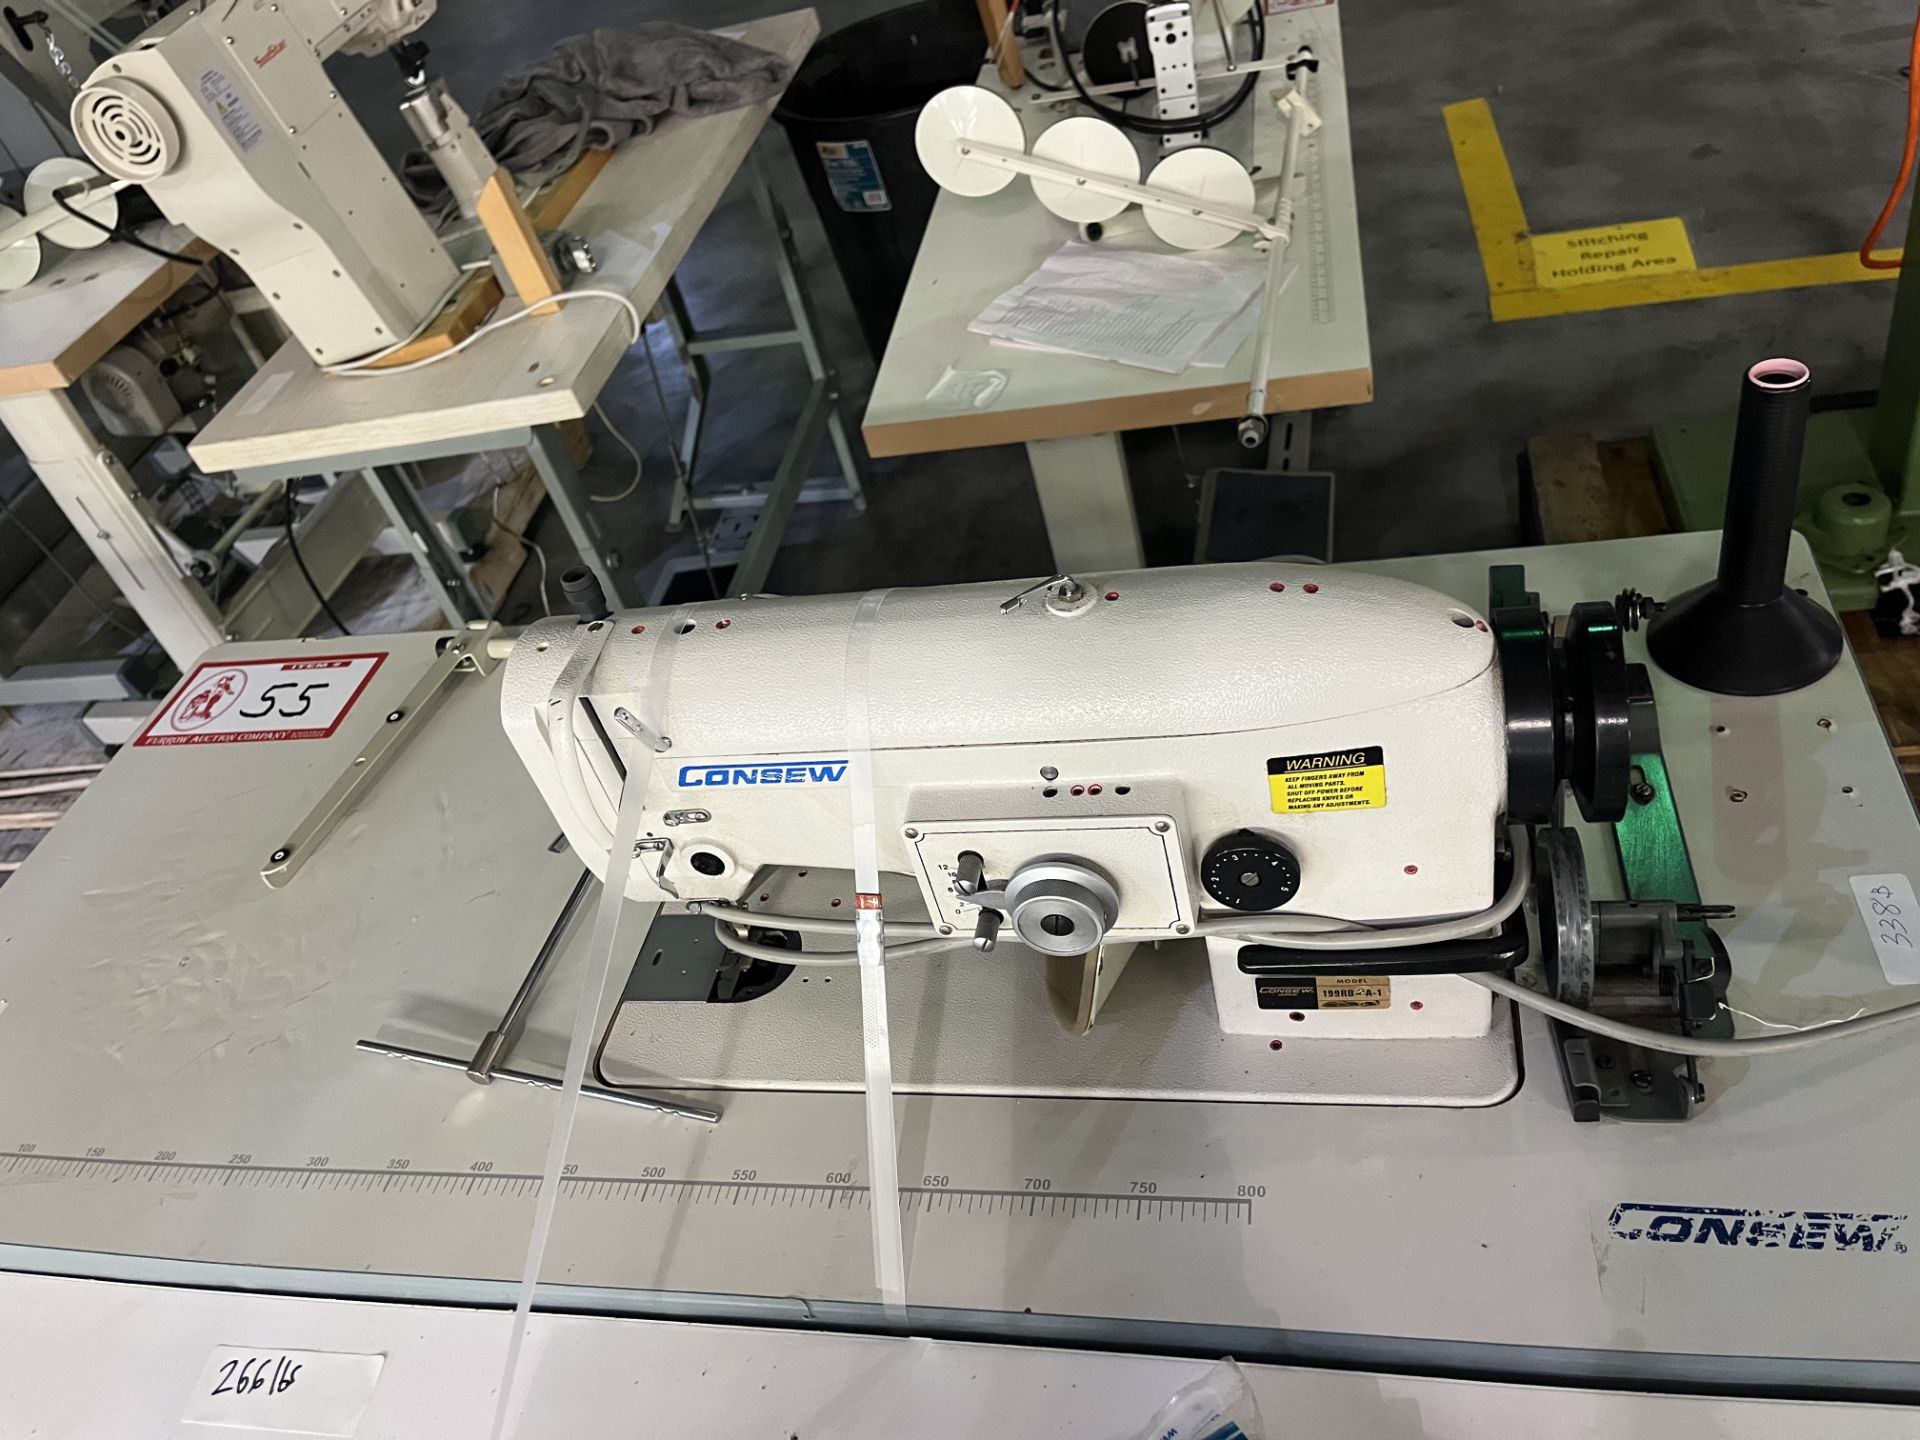 Consew Zigzag sewing Machines 199RB-2a-1 in Good, Working Condition S/N 17040157, Weight = 266 lbs - Bild 2 aus 6